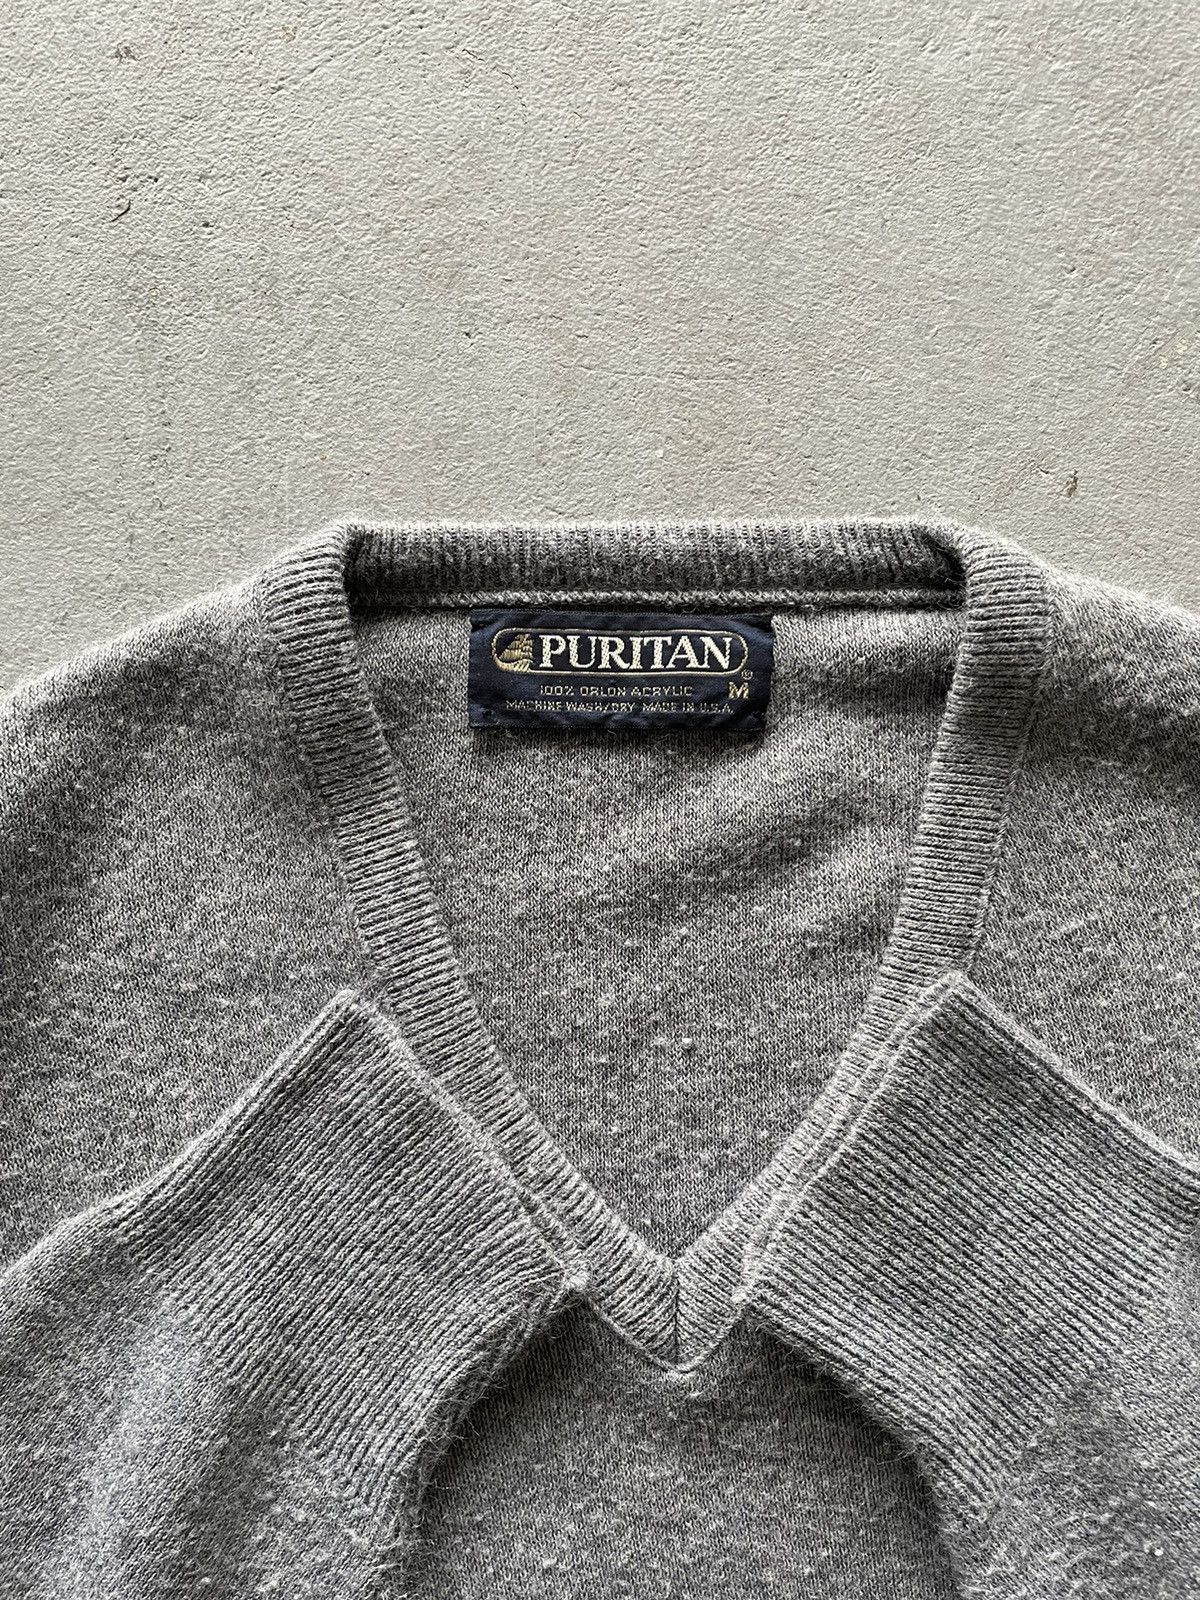 Vintage Vintage Grey Puritan Pull over sweater Size US M / EU 48-50 / 2 - 2 Preview